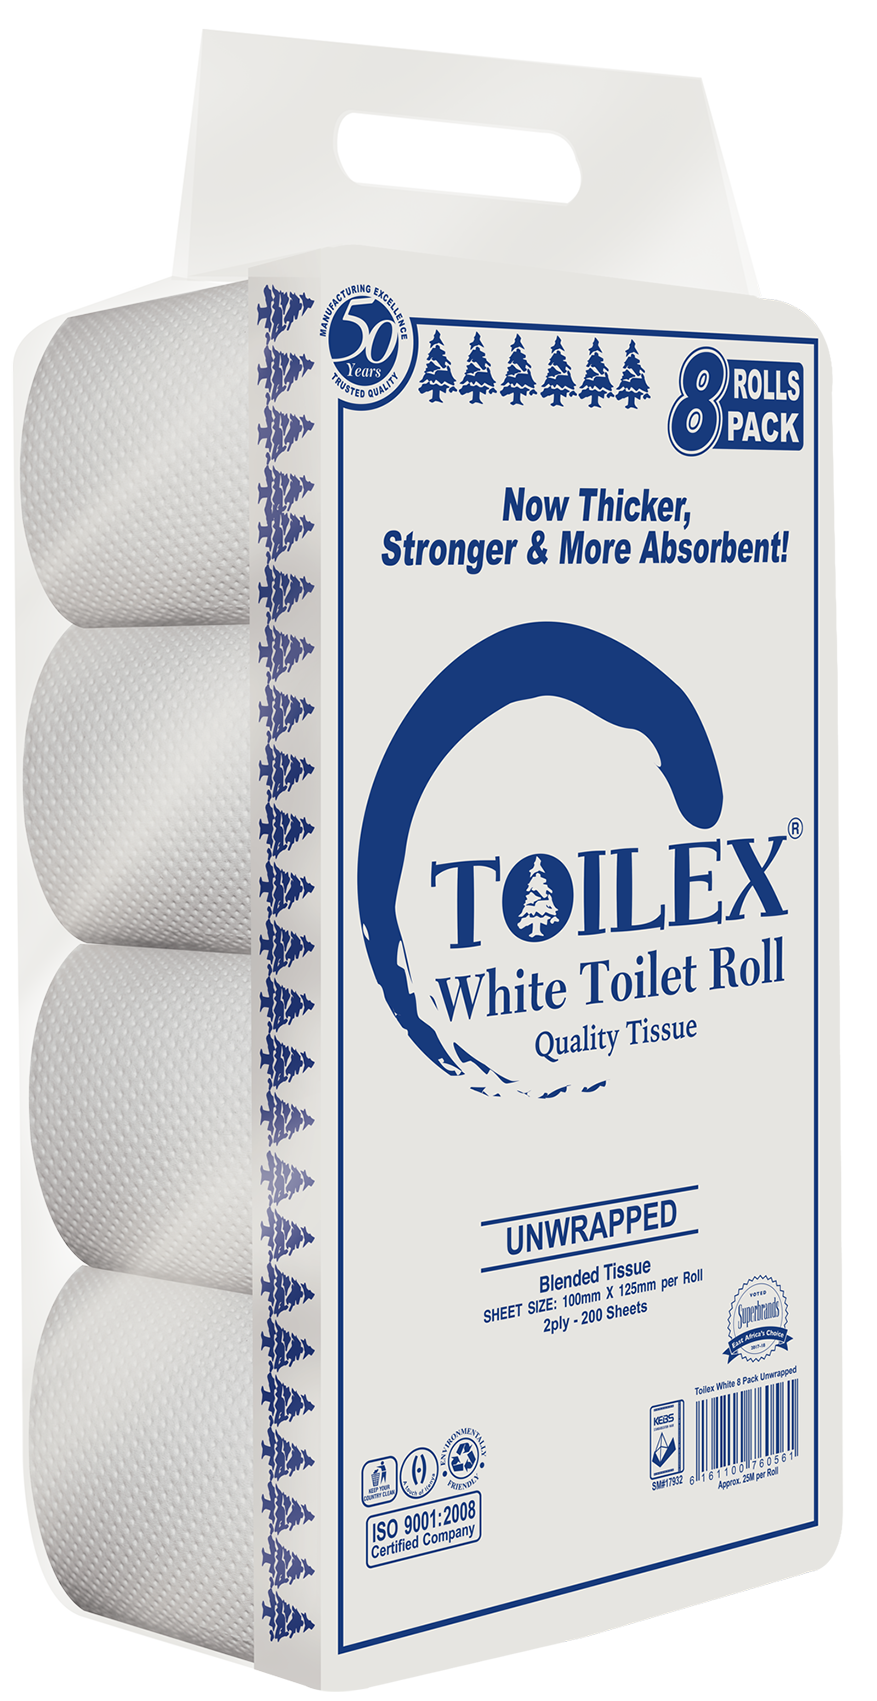 Toilex-8pack.png - 1.06 MB